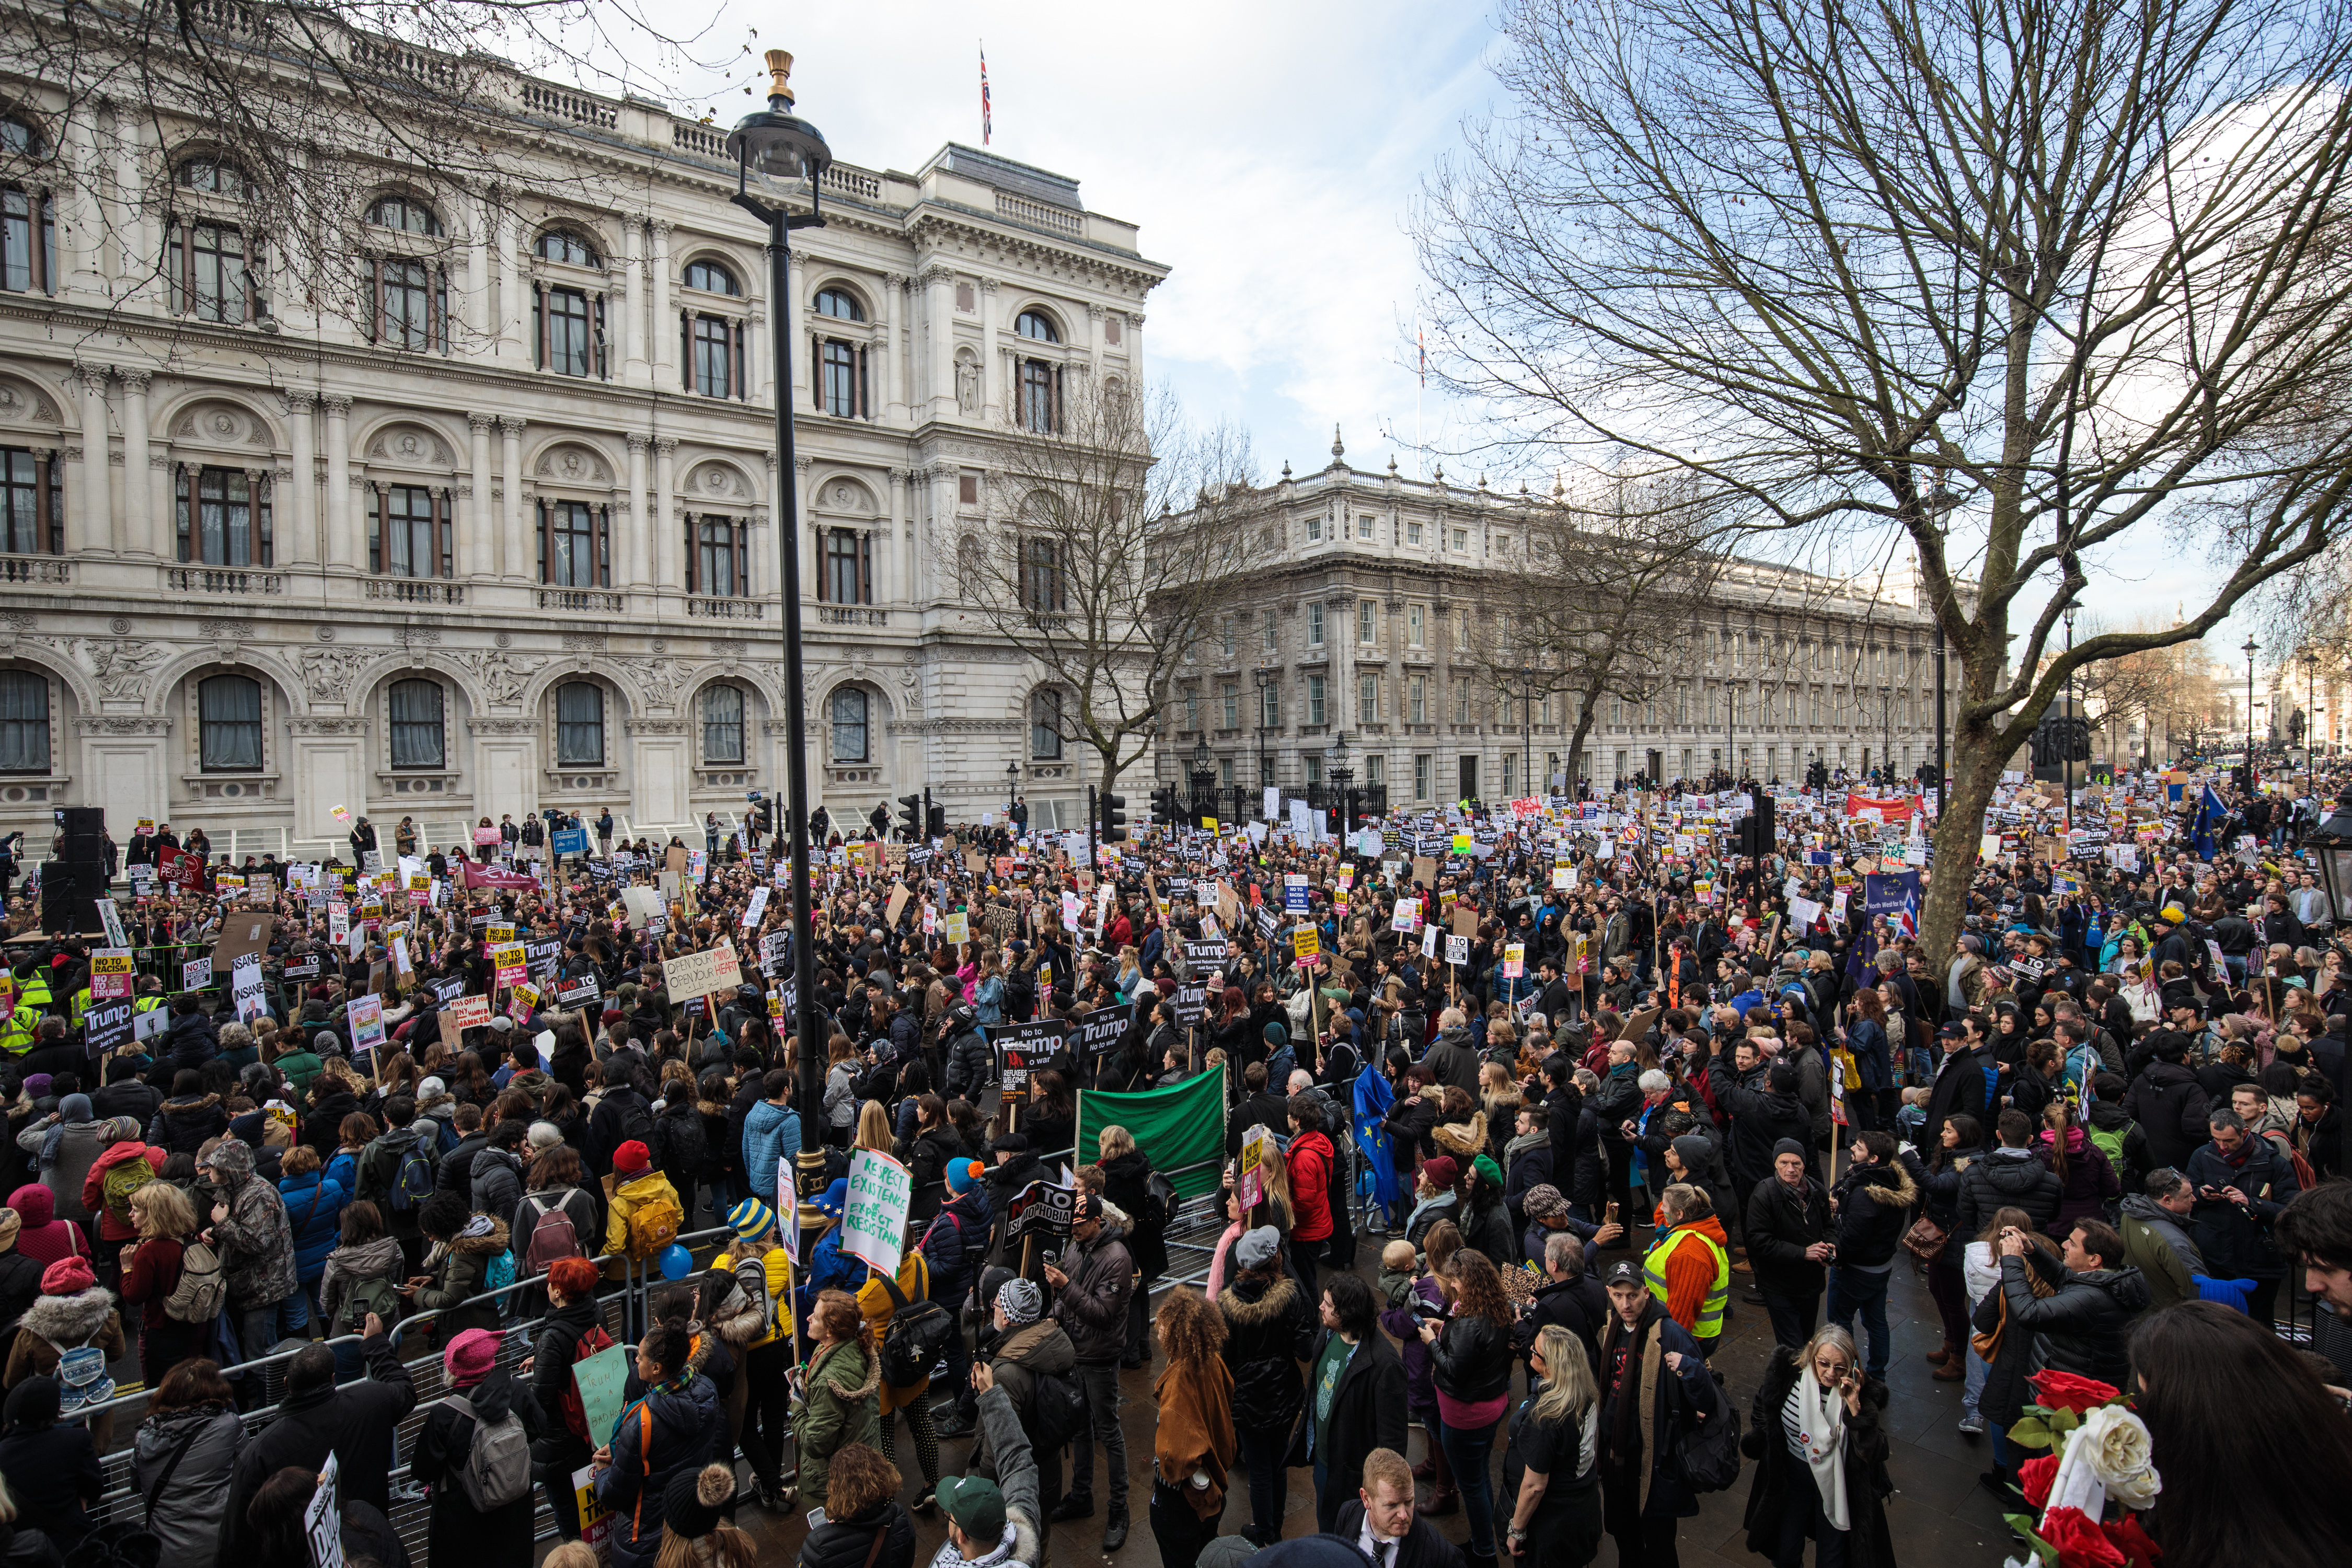 Thousands of protesters with placards take part in a demonstration against U.S. President Donald Trump on Whitehall on February 4, 2017 in London, England. (Jack Taylor/Getty Images)